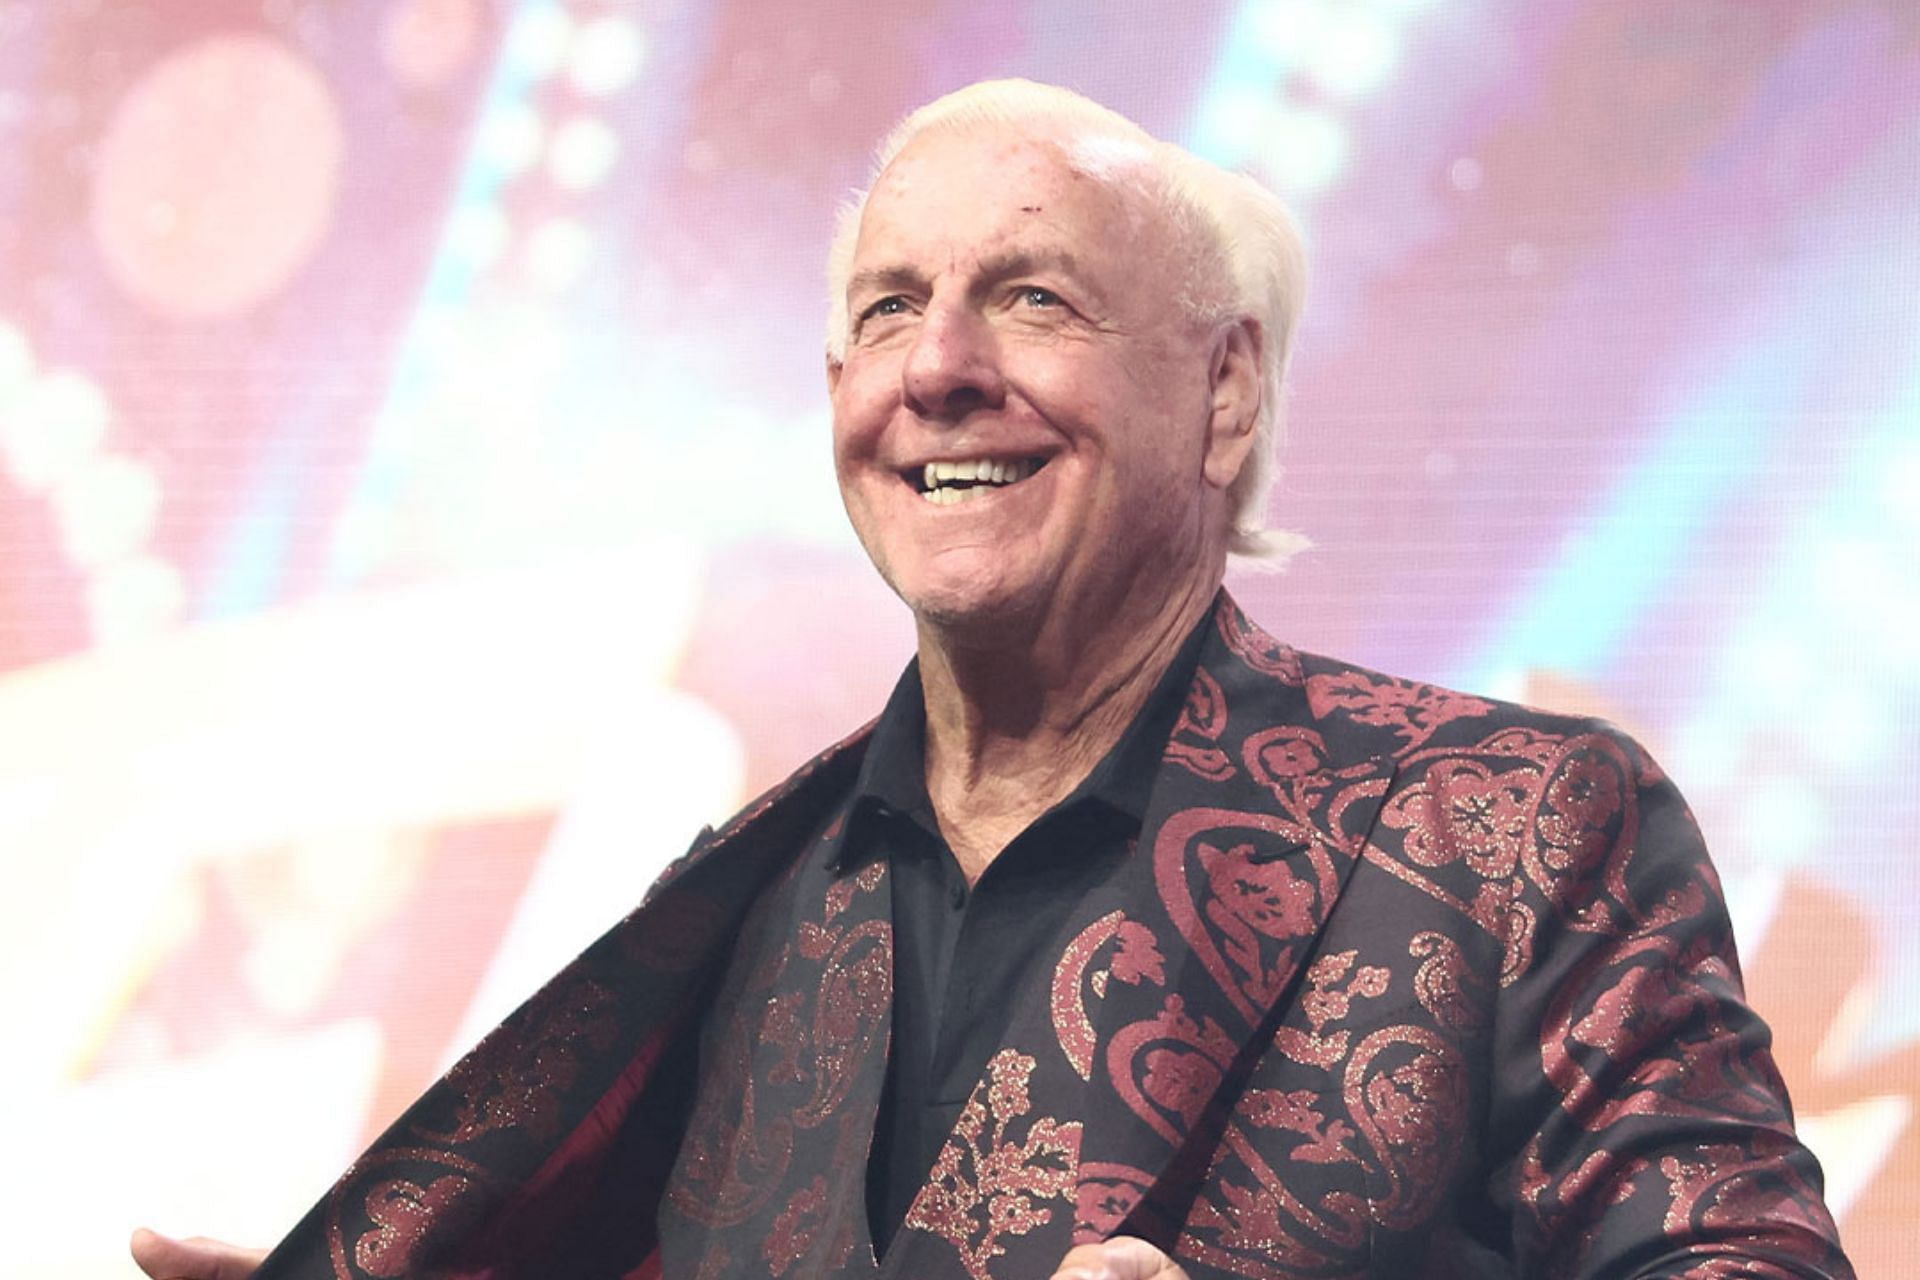 Ric Flair featured in a social media photo of another iconci wrestler [Image Courtesy: AEW Facebook]